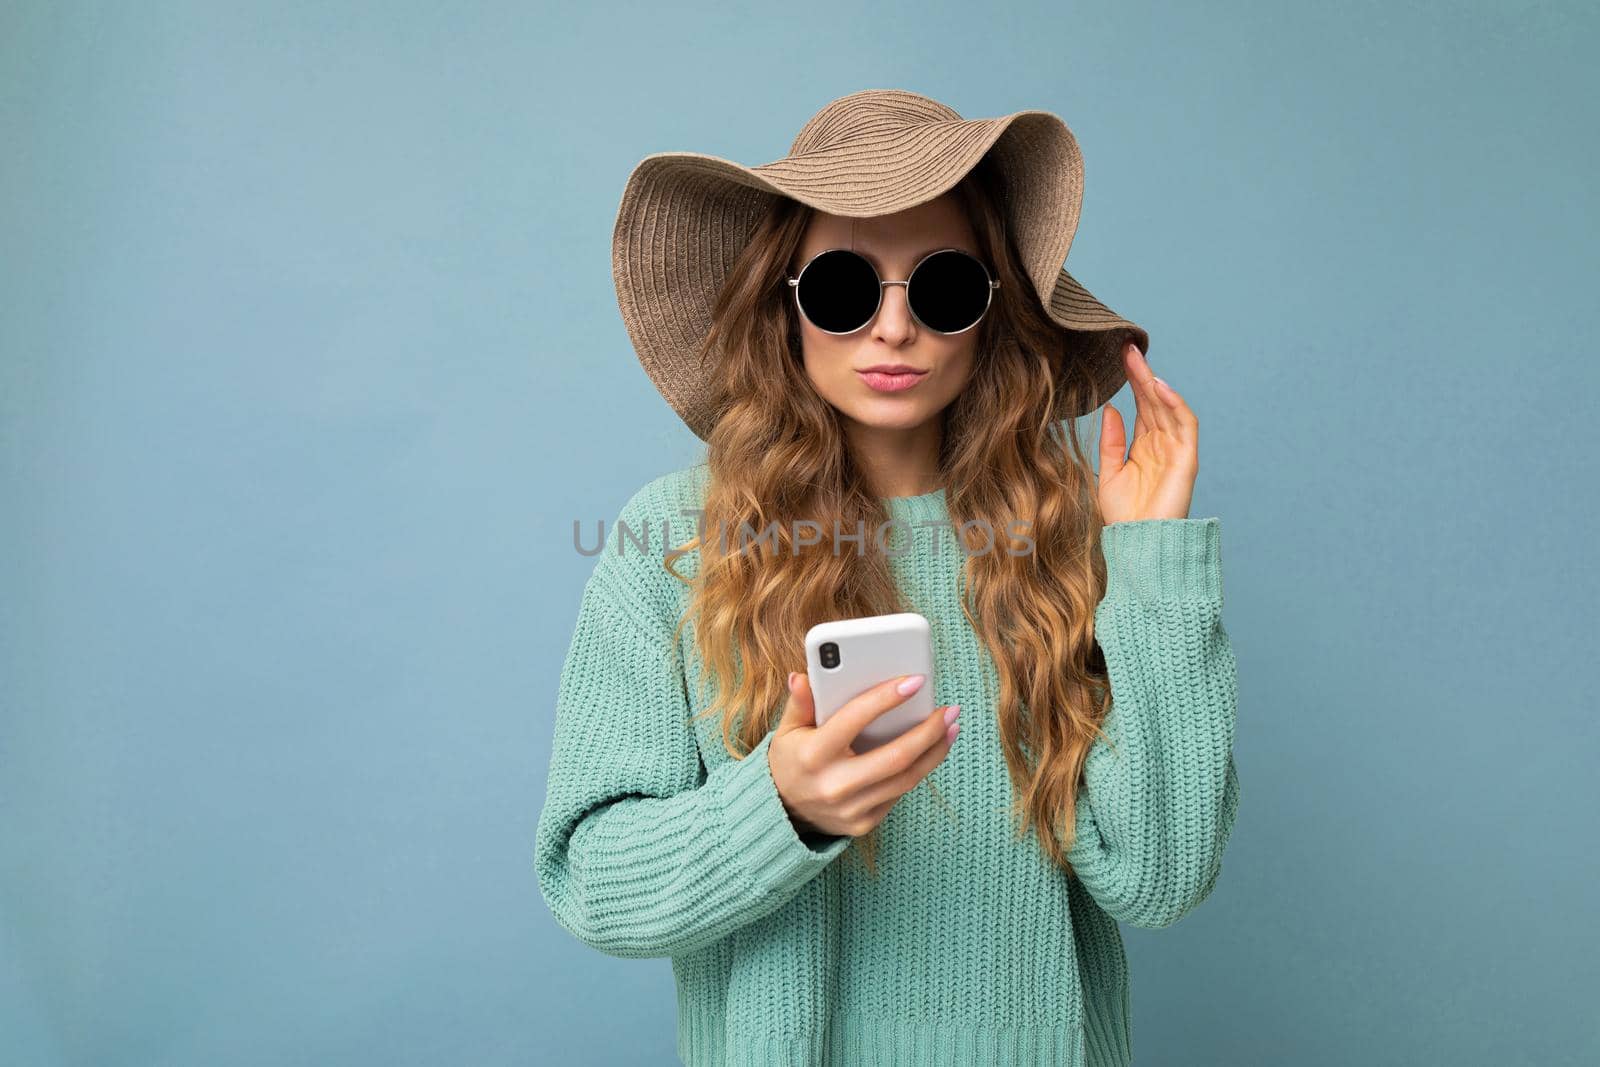 Beautiful young blonde woman wearing blue sweater hat and sunglasses standing isolated over blue background surfing on the internet via phone looking at gadjet.